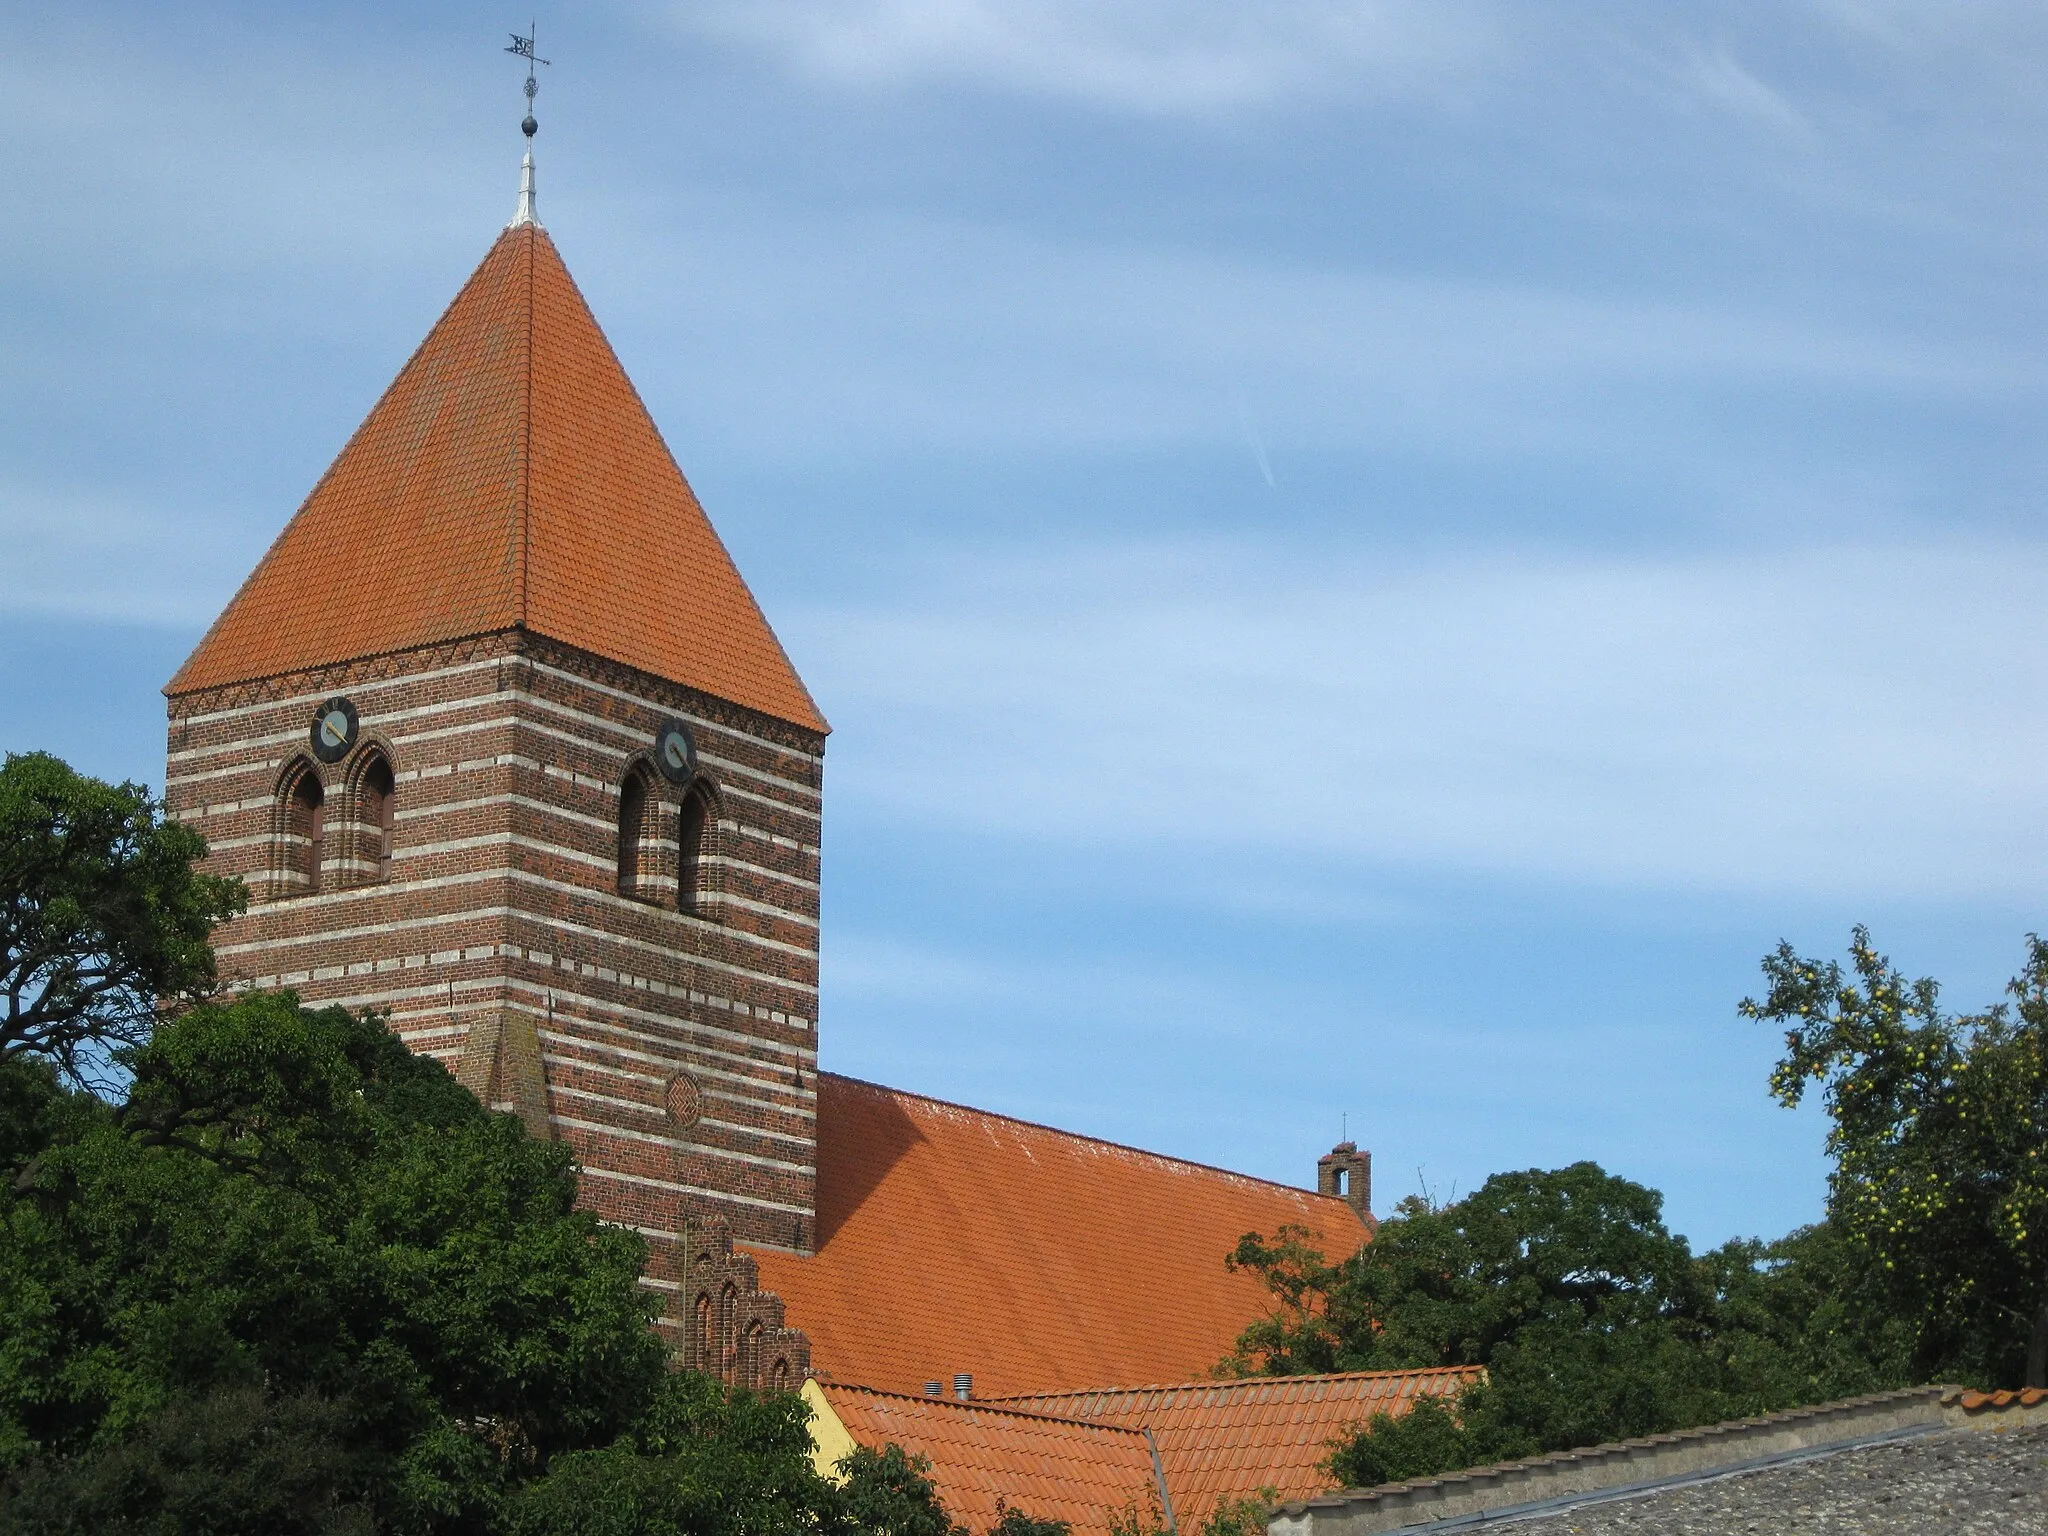 Photo showing: View at the tower of the church "Stege Kirke" in the small town "Stege". The town is located on the island Møn south of Zealand in east Denmark.